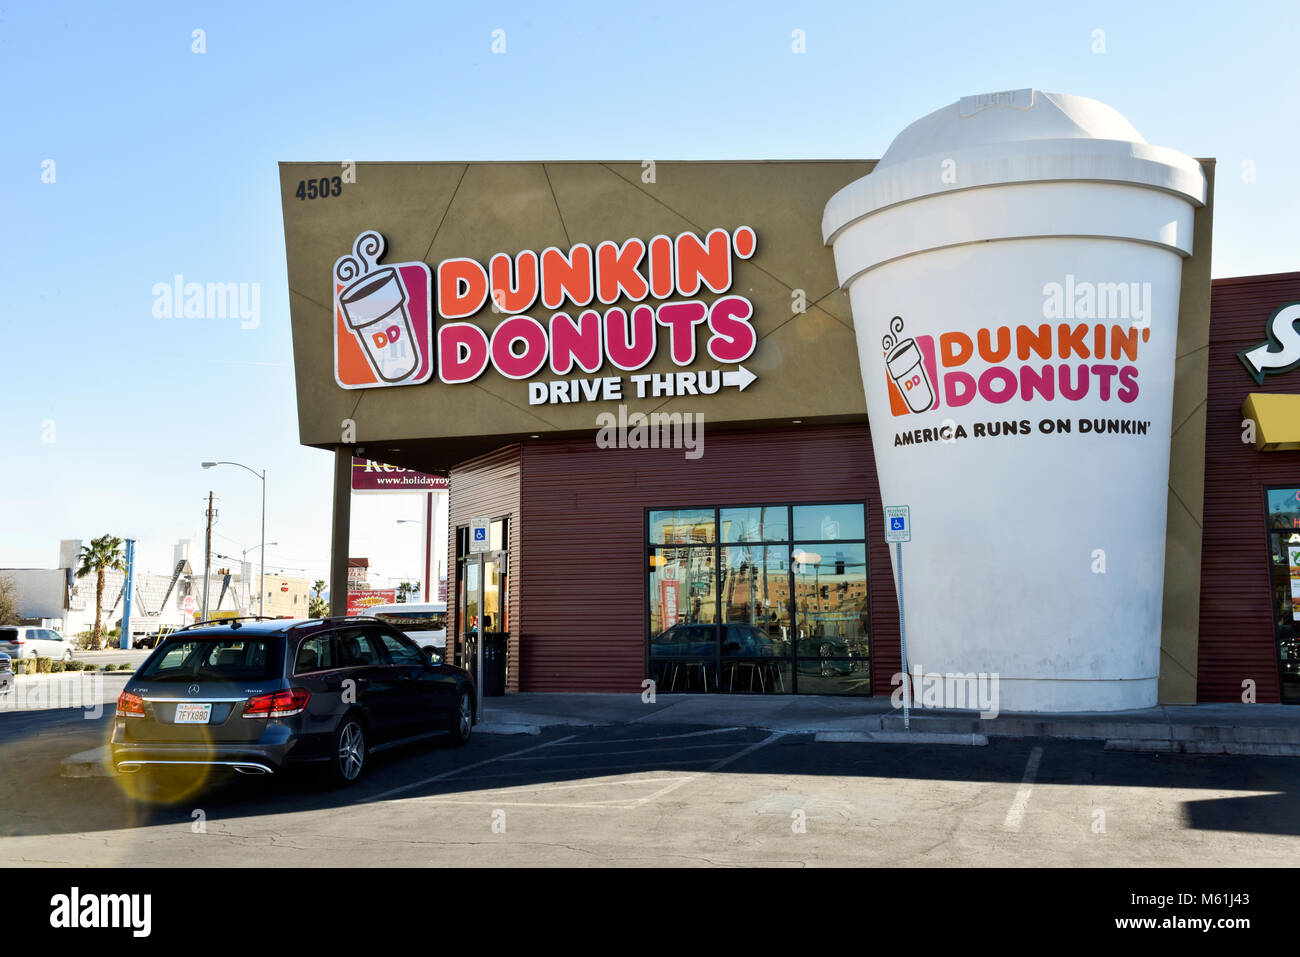 Dunkin Donuts fast food restaurant storefront Stock Photo